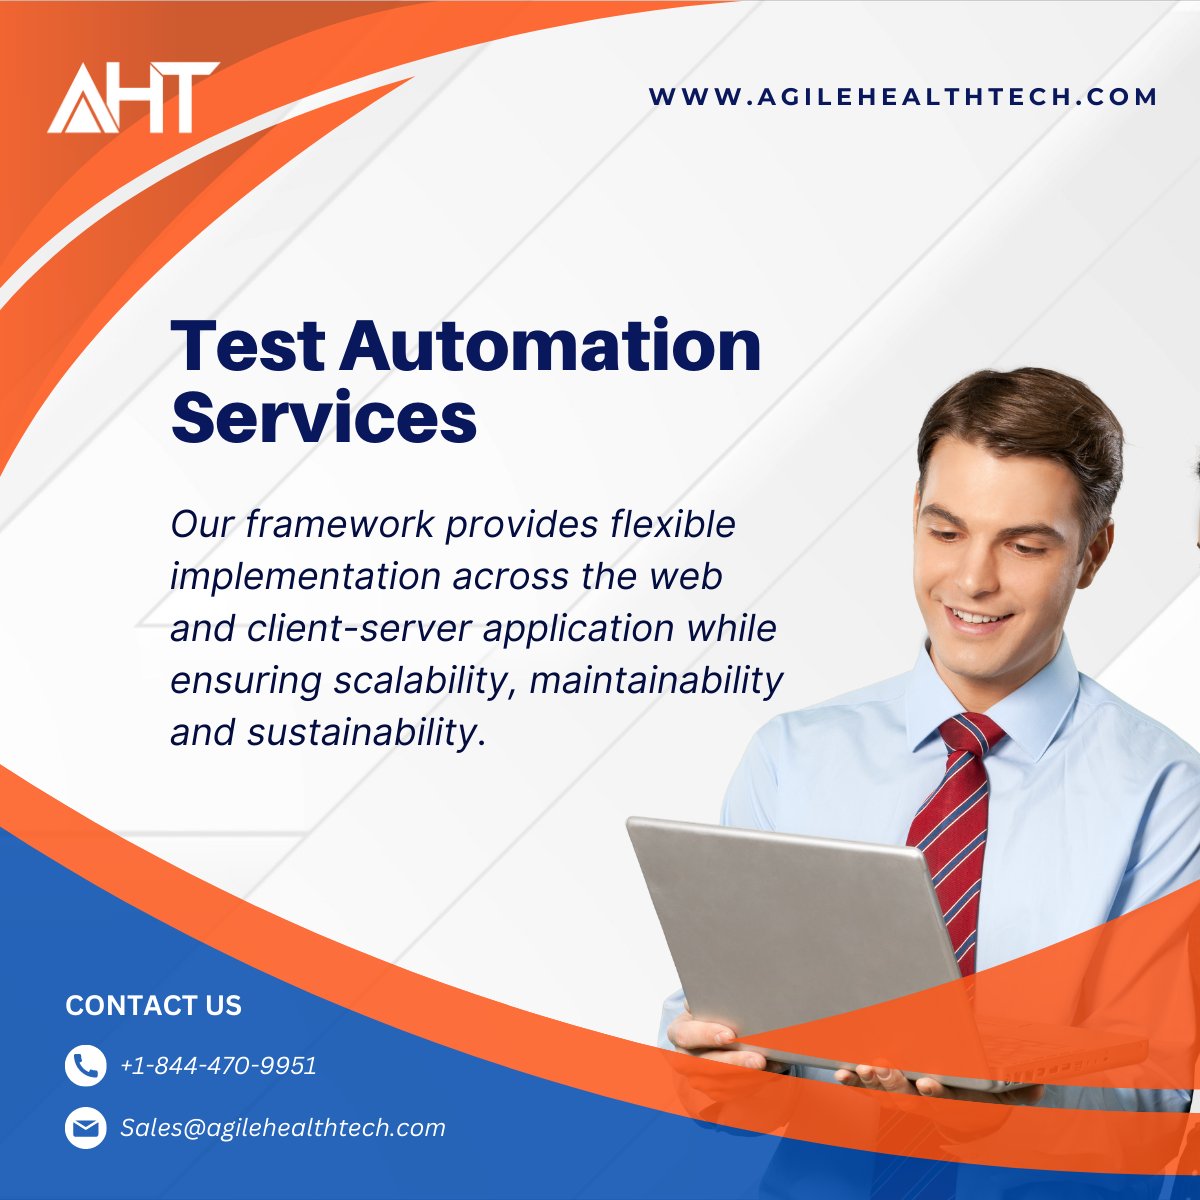 Our experts collaborate with you to define automation goals and identify the optimal tests to automate, ensuring maximum quality benefits and cost savings for your organization. 

#IoT #AIandAutomation #BusinessConsulting #HealthcareConsulting #Healthcare #AHT #AgileHealthTech